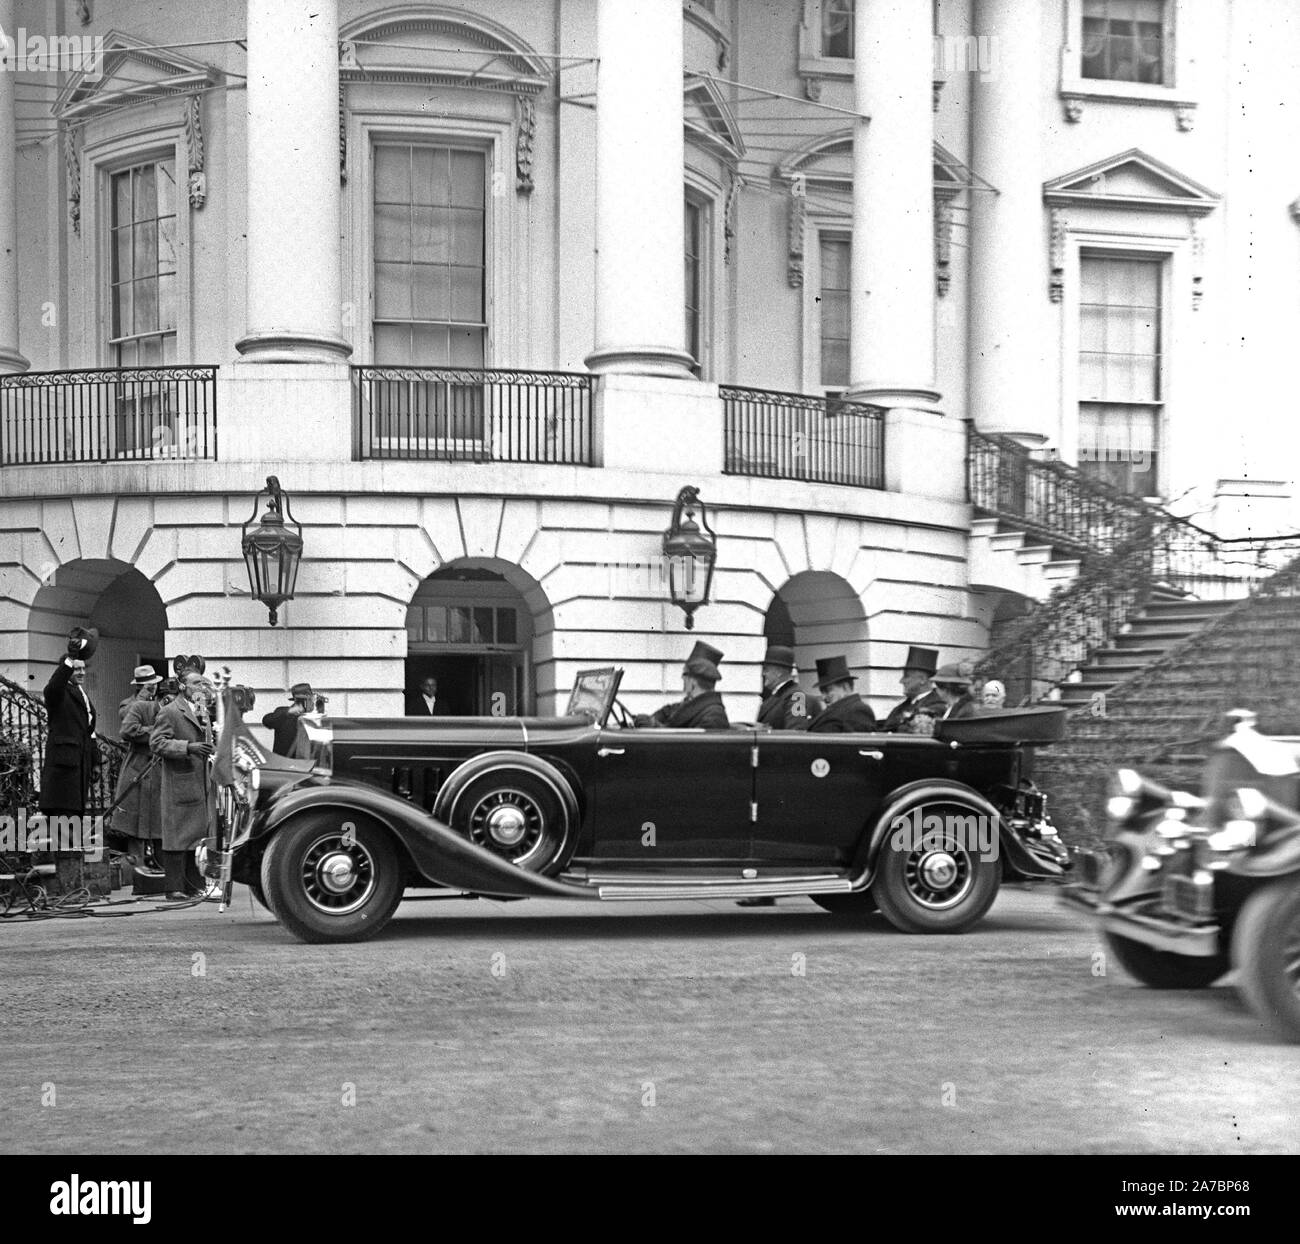 Franklin D. Roosevelt - Franklin D. Roosevelt inauguration. Automobile with Roosevelts at White House, Washington, D.C. March 4, 1933 Stock Photo